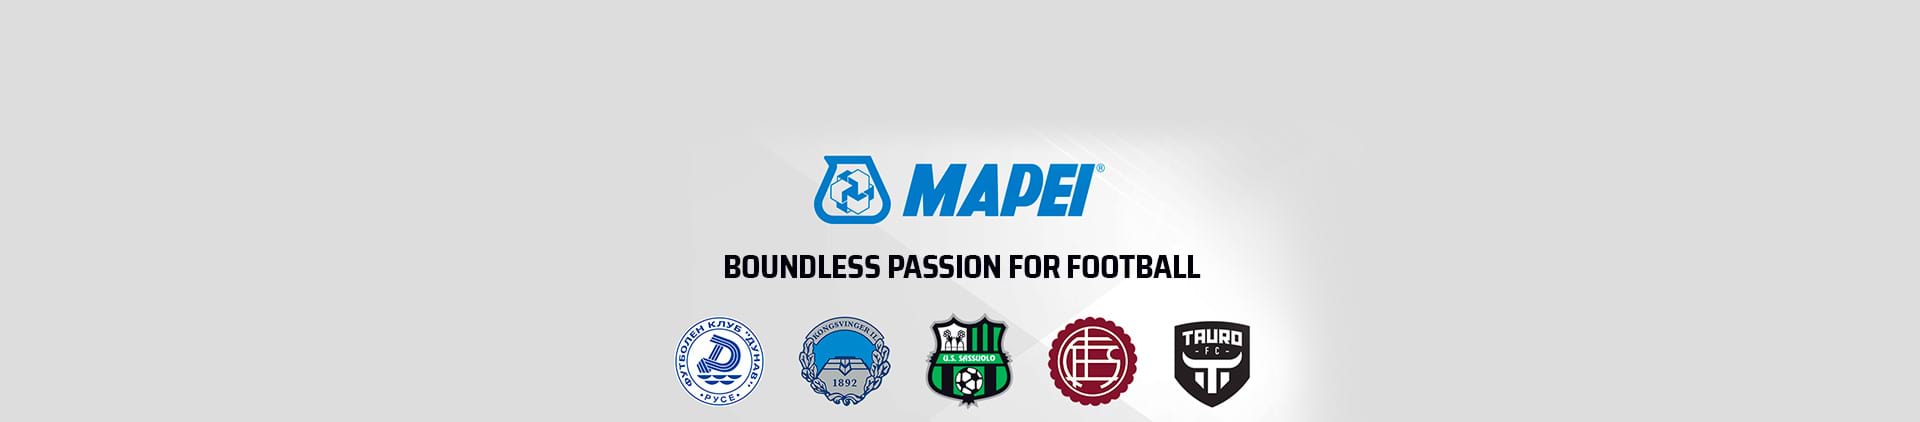 Mapei: boundless passion for football